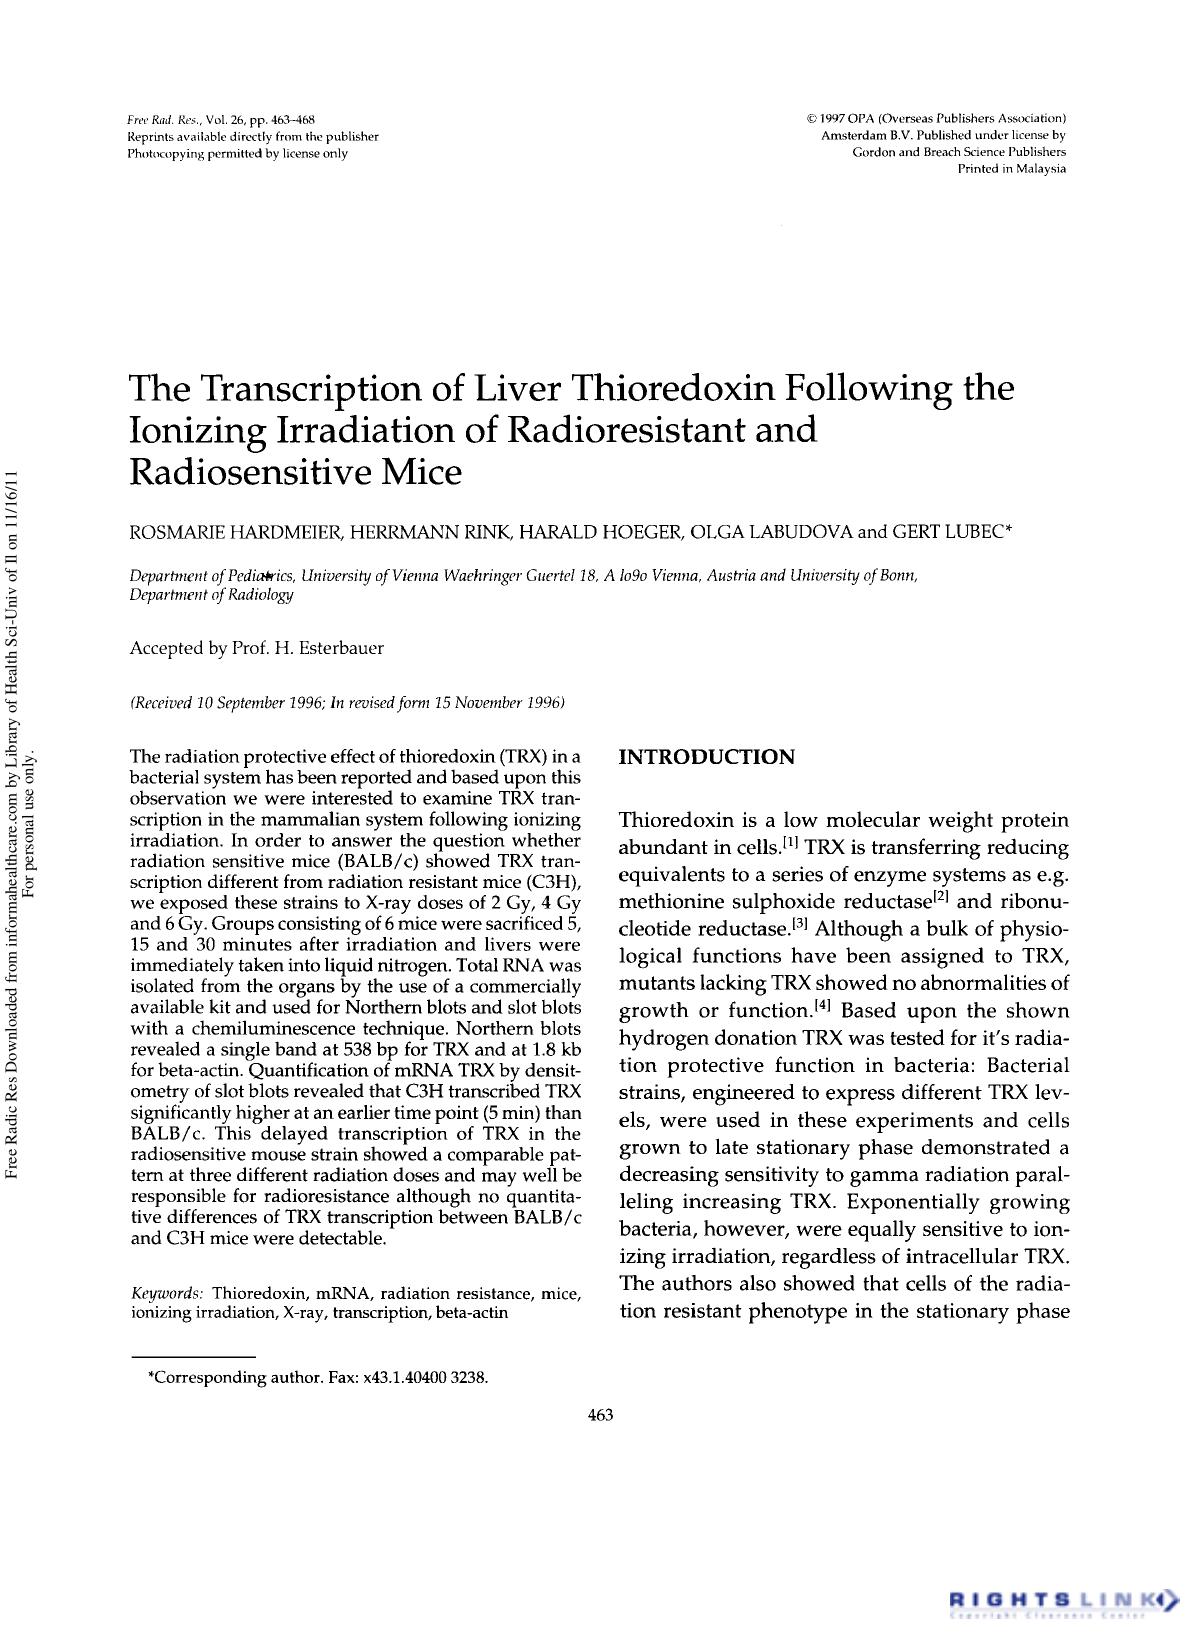 The Transcription of Liver Thioredoxin Following the Ionizing Irradiation of Radioresistant and Radiosensitive Mice by Rosmarie Hardmeier1 Herrmnn Rink2 Harald Hoeger1 Olga Labudova1 & Gert Lubec1 1†